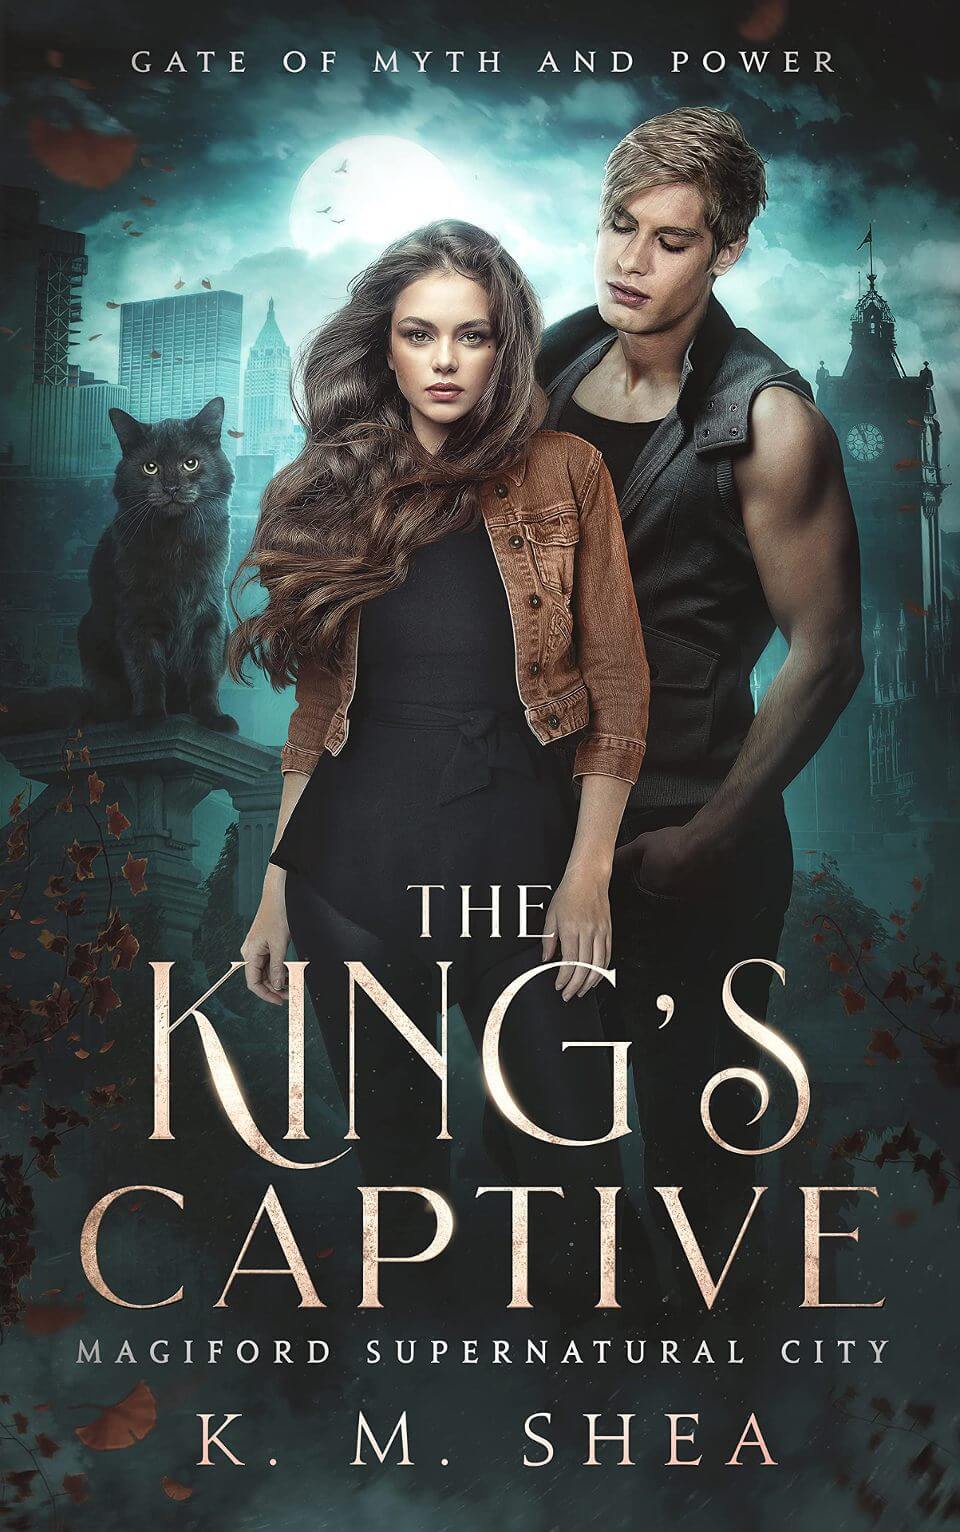 The King's Captive book cover